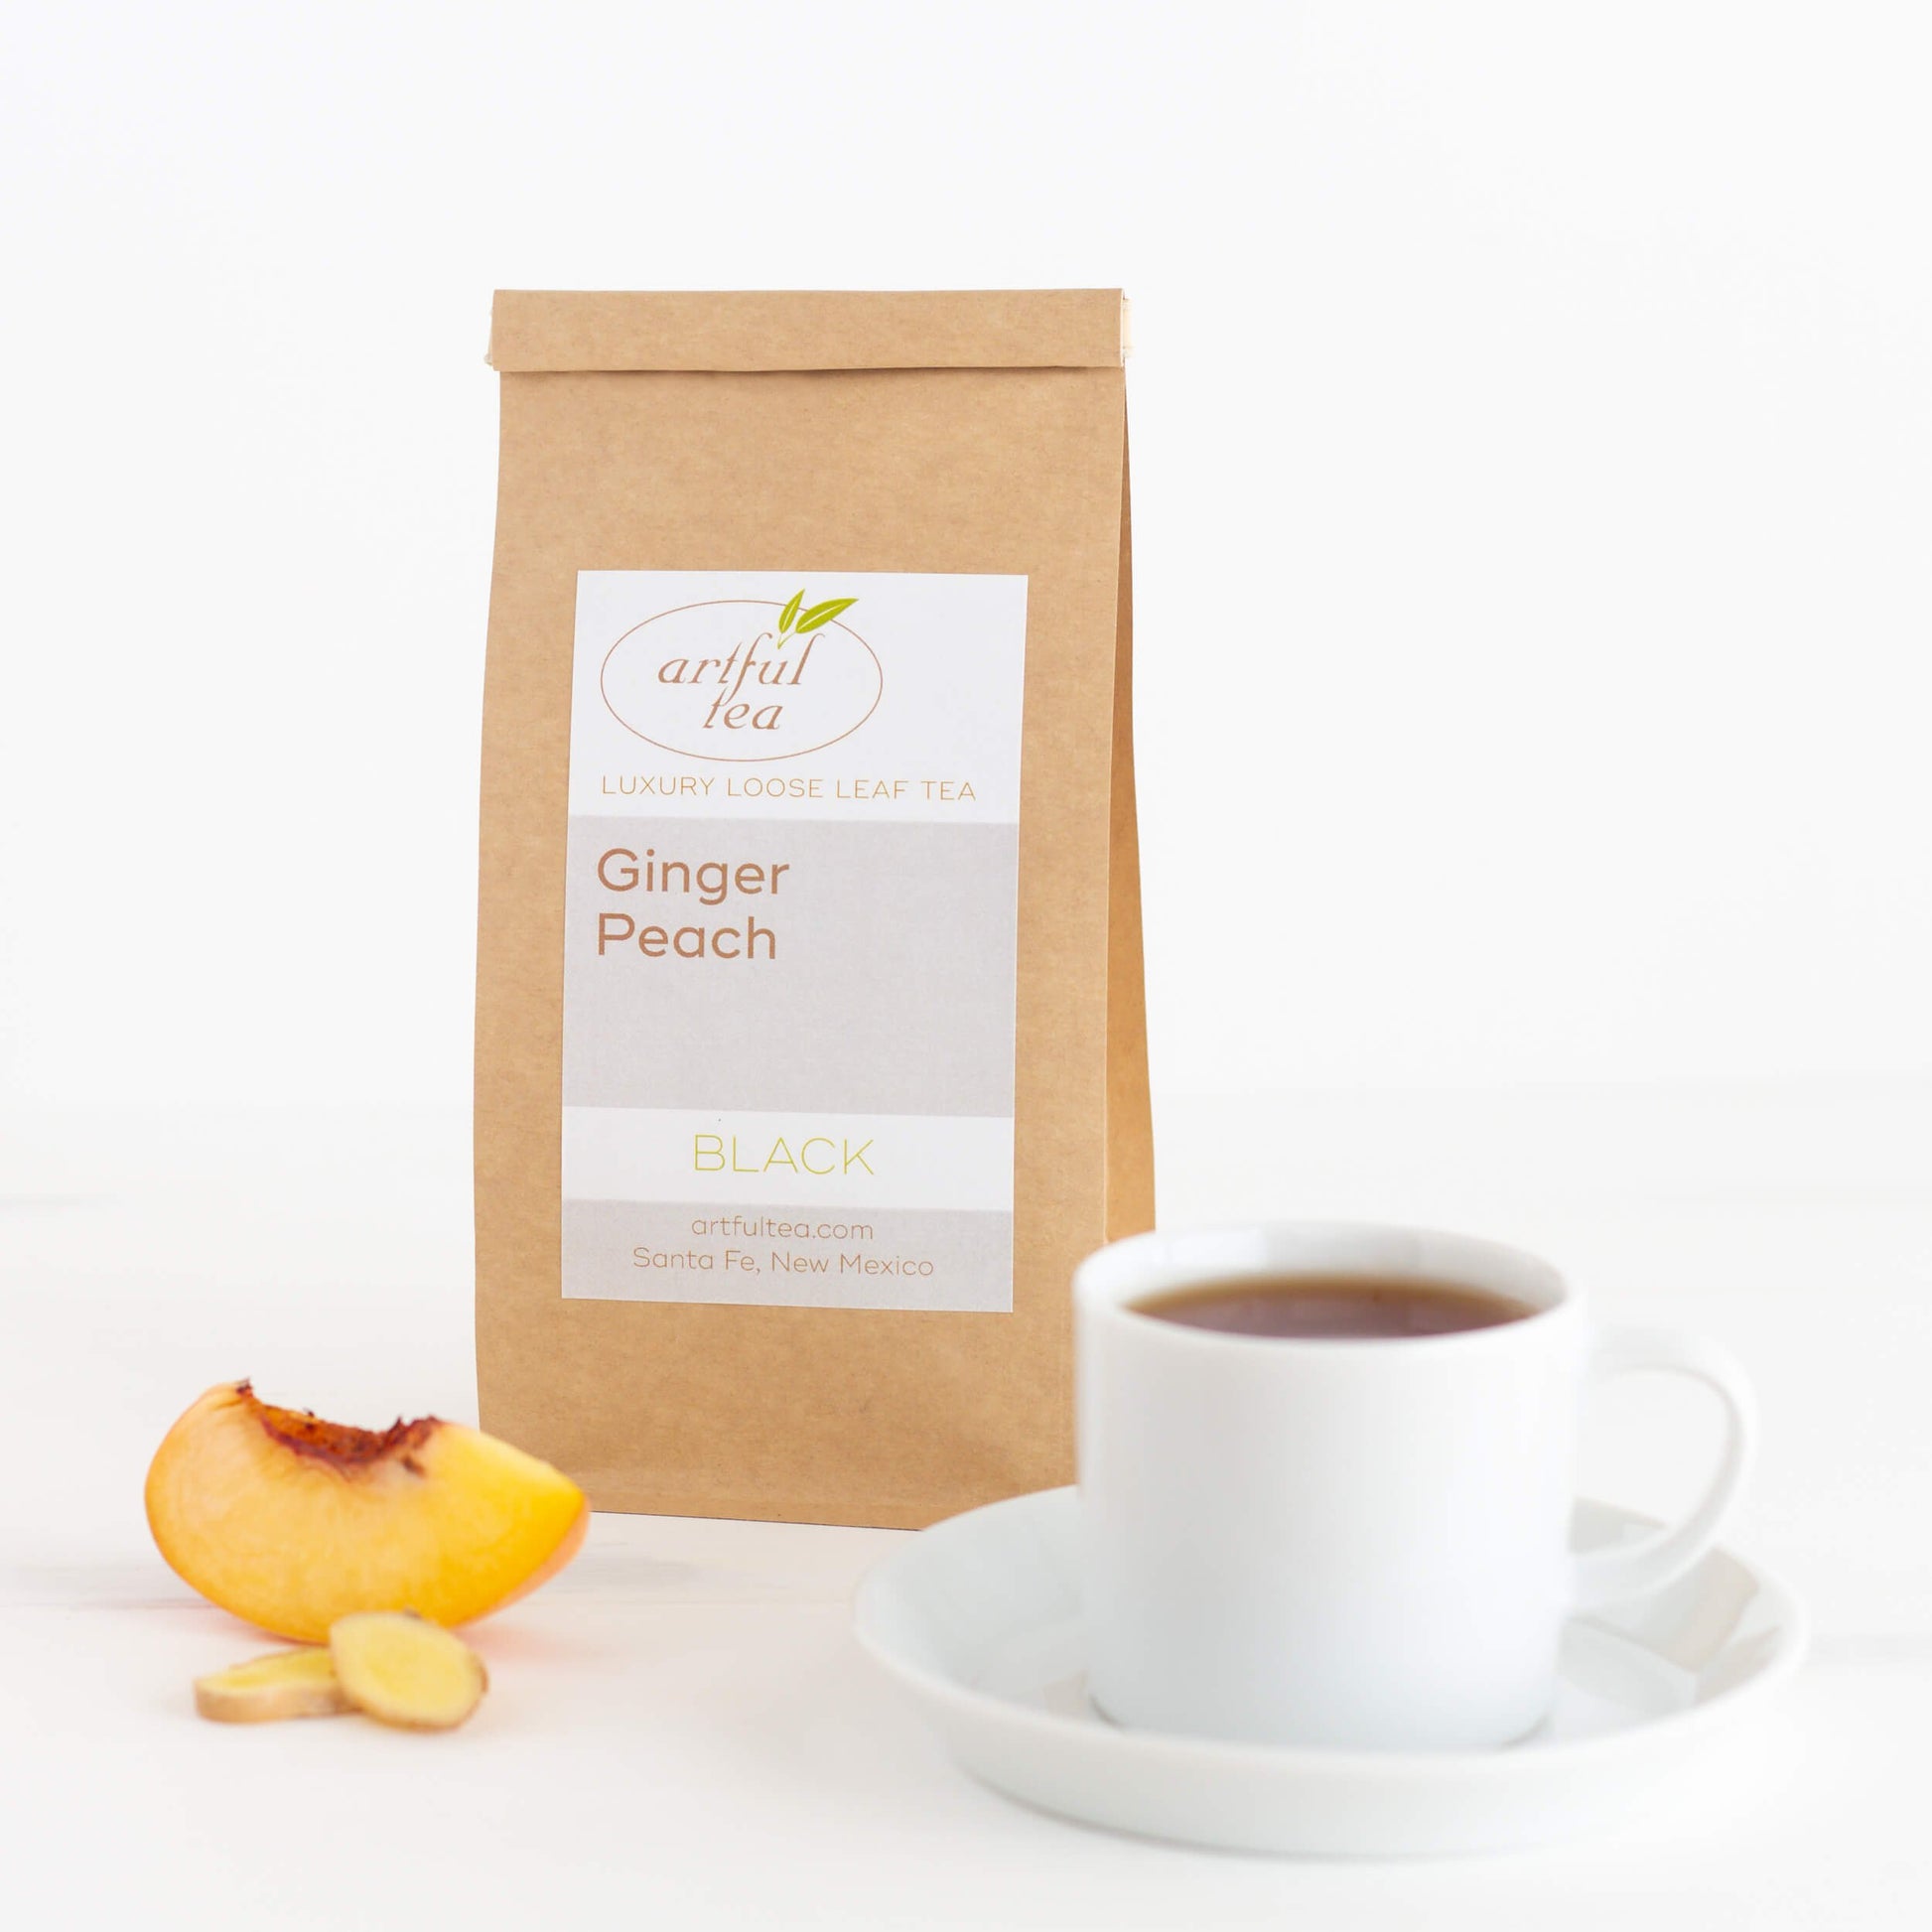 Ginger Peach Black Tea shown packaged in a kraft bag with a wedge of peach and two slices of ginger in the foreground, next to a white teacup of brewed tea on a white saucer